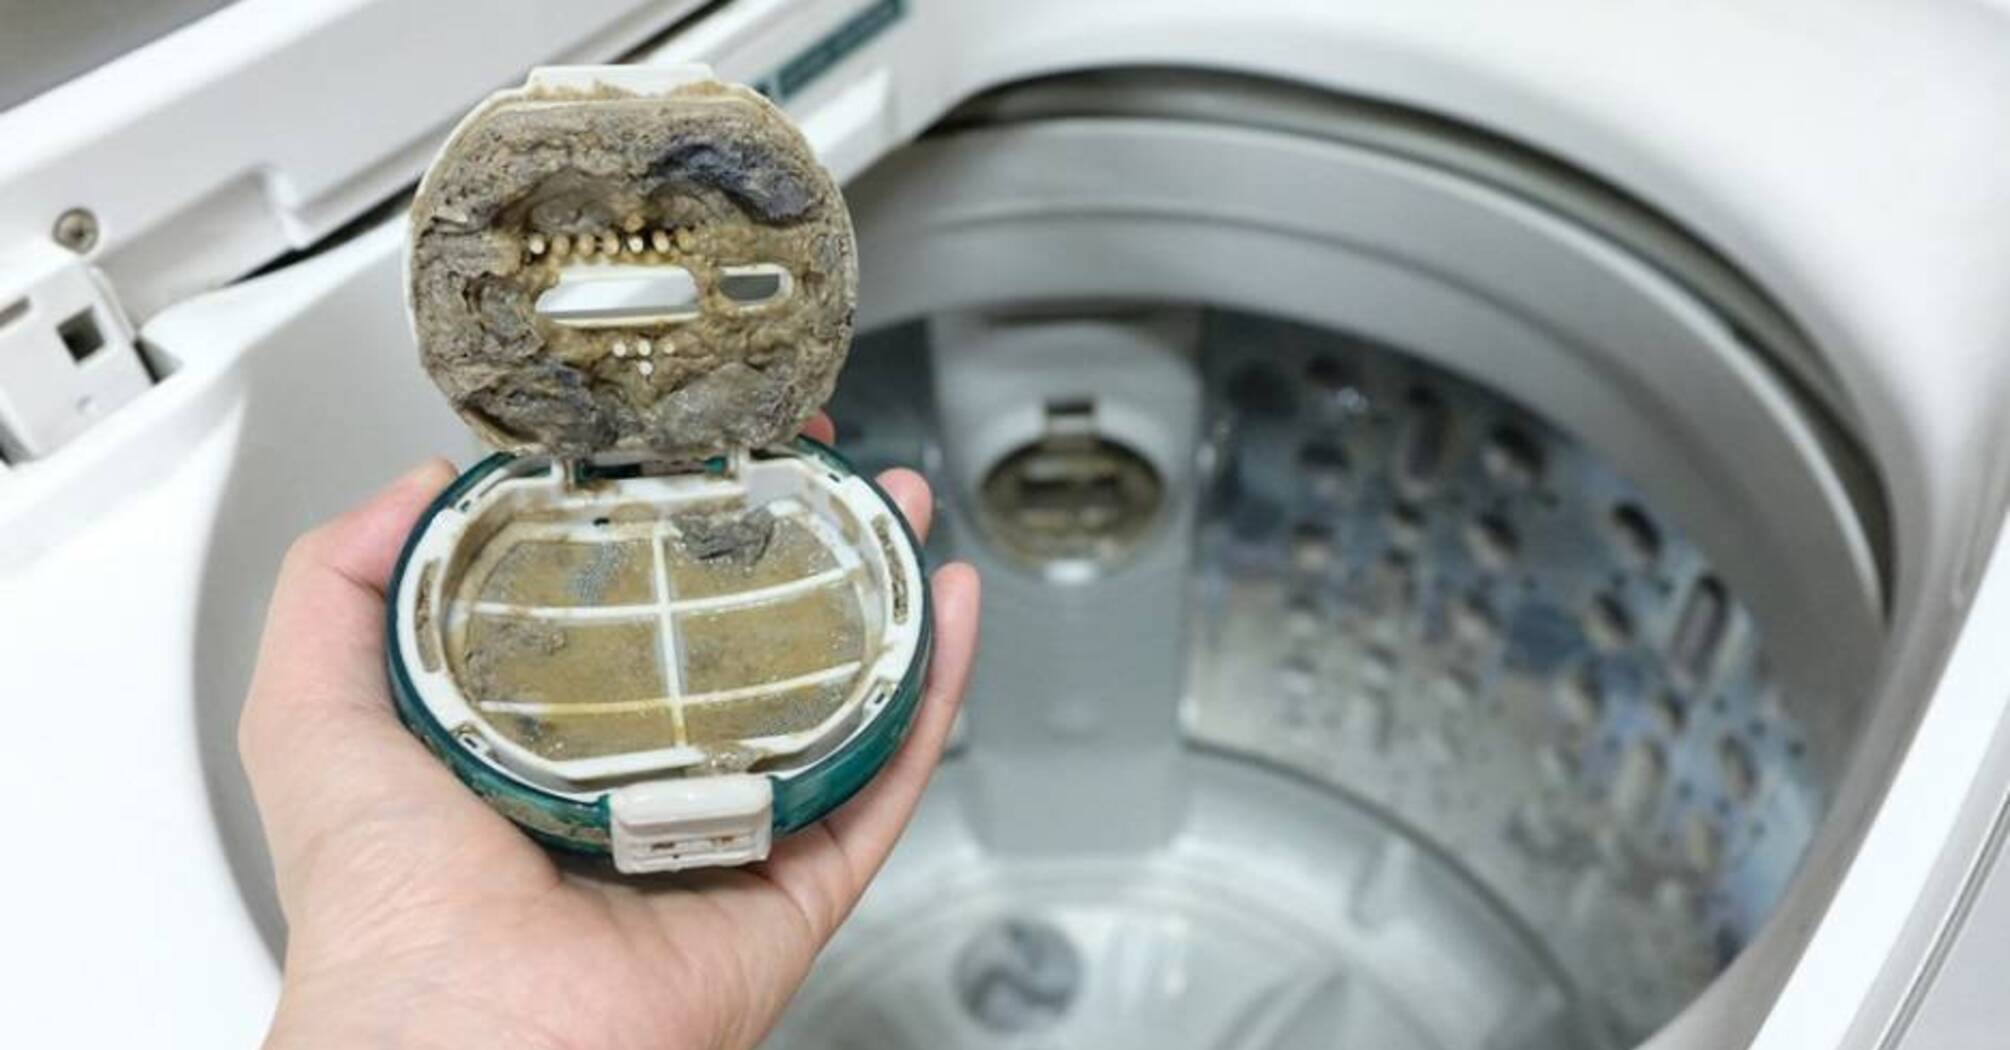 How to care for your washing machine